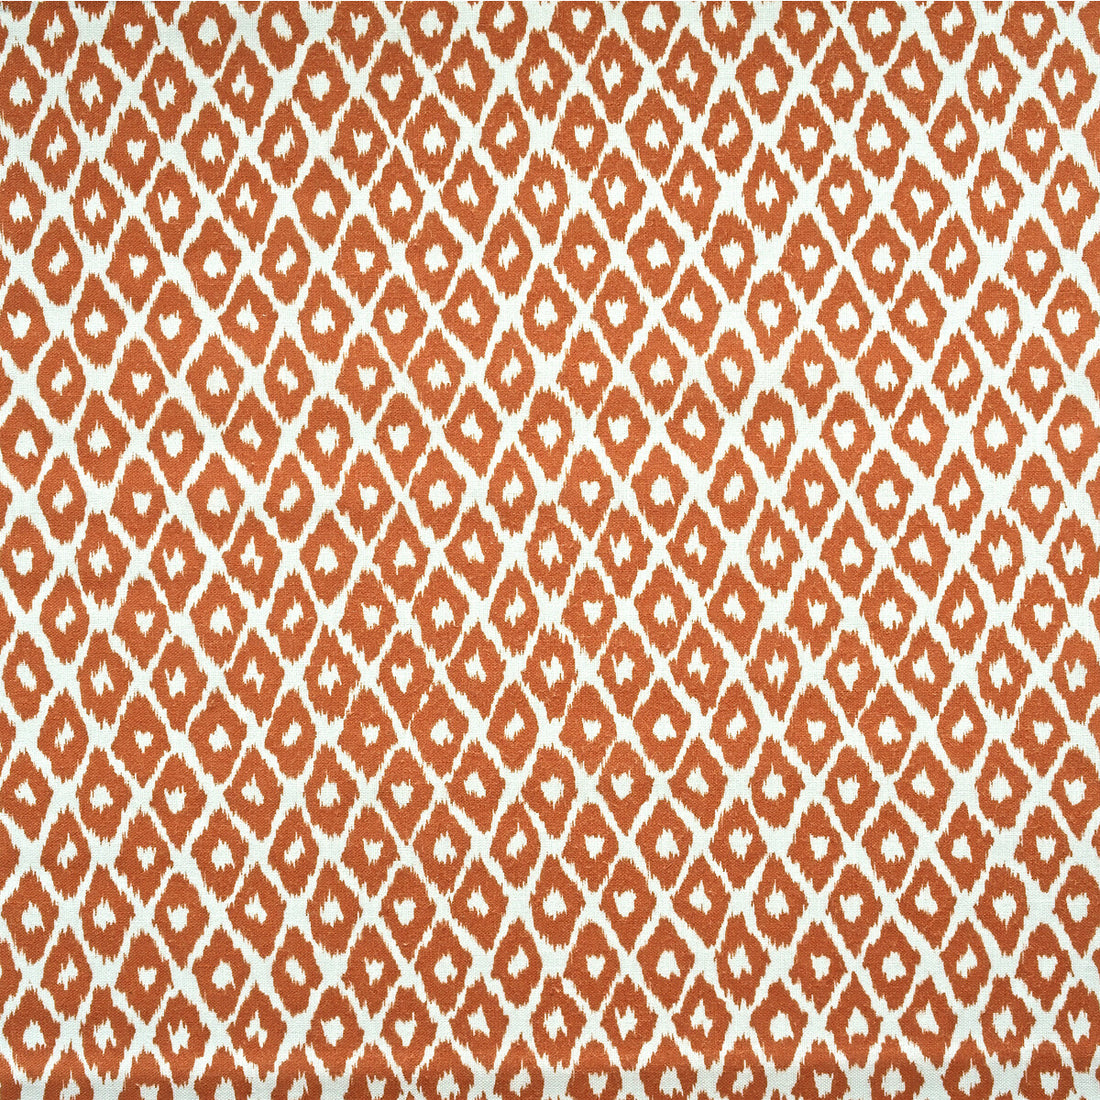 Gypsum Outdoor fabric in lava color - pattern AM100349.12.0 - by Kravet Couture in the Andrew Martin The Great Outdoors collection